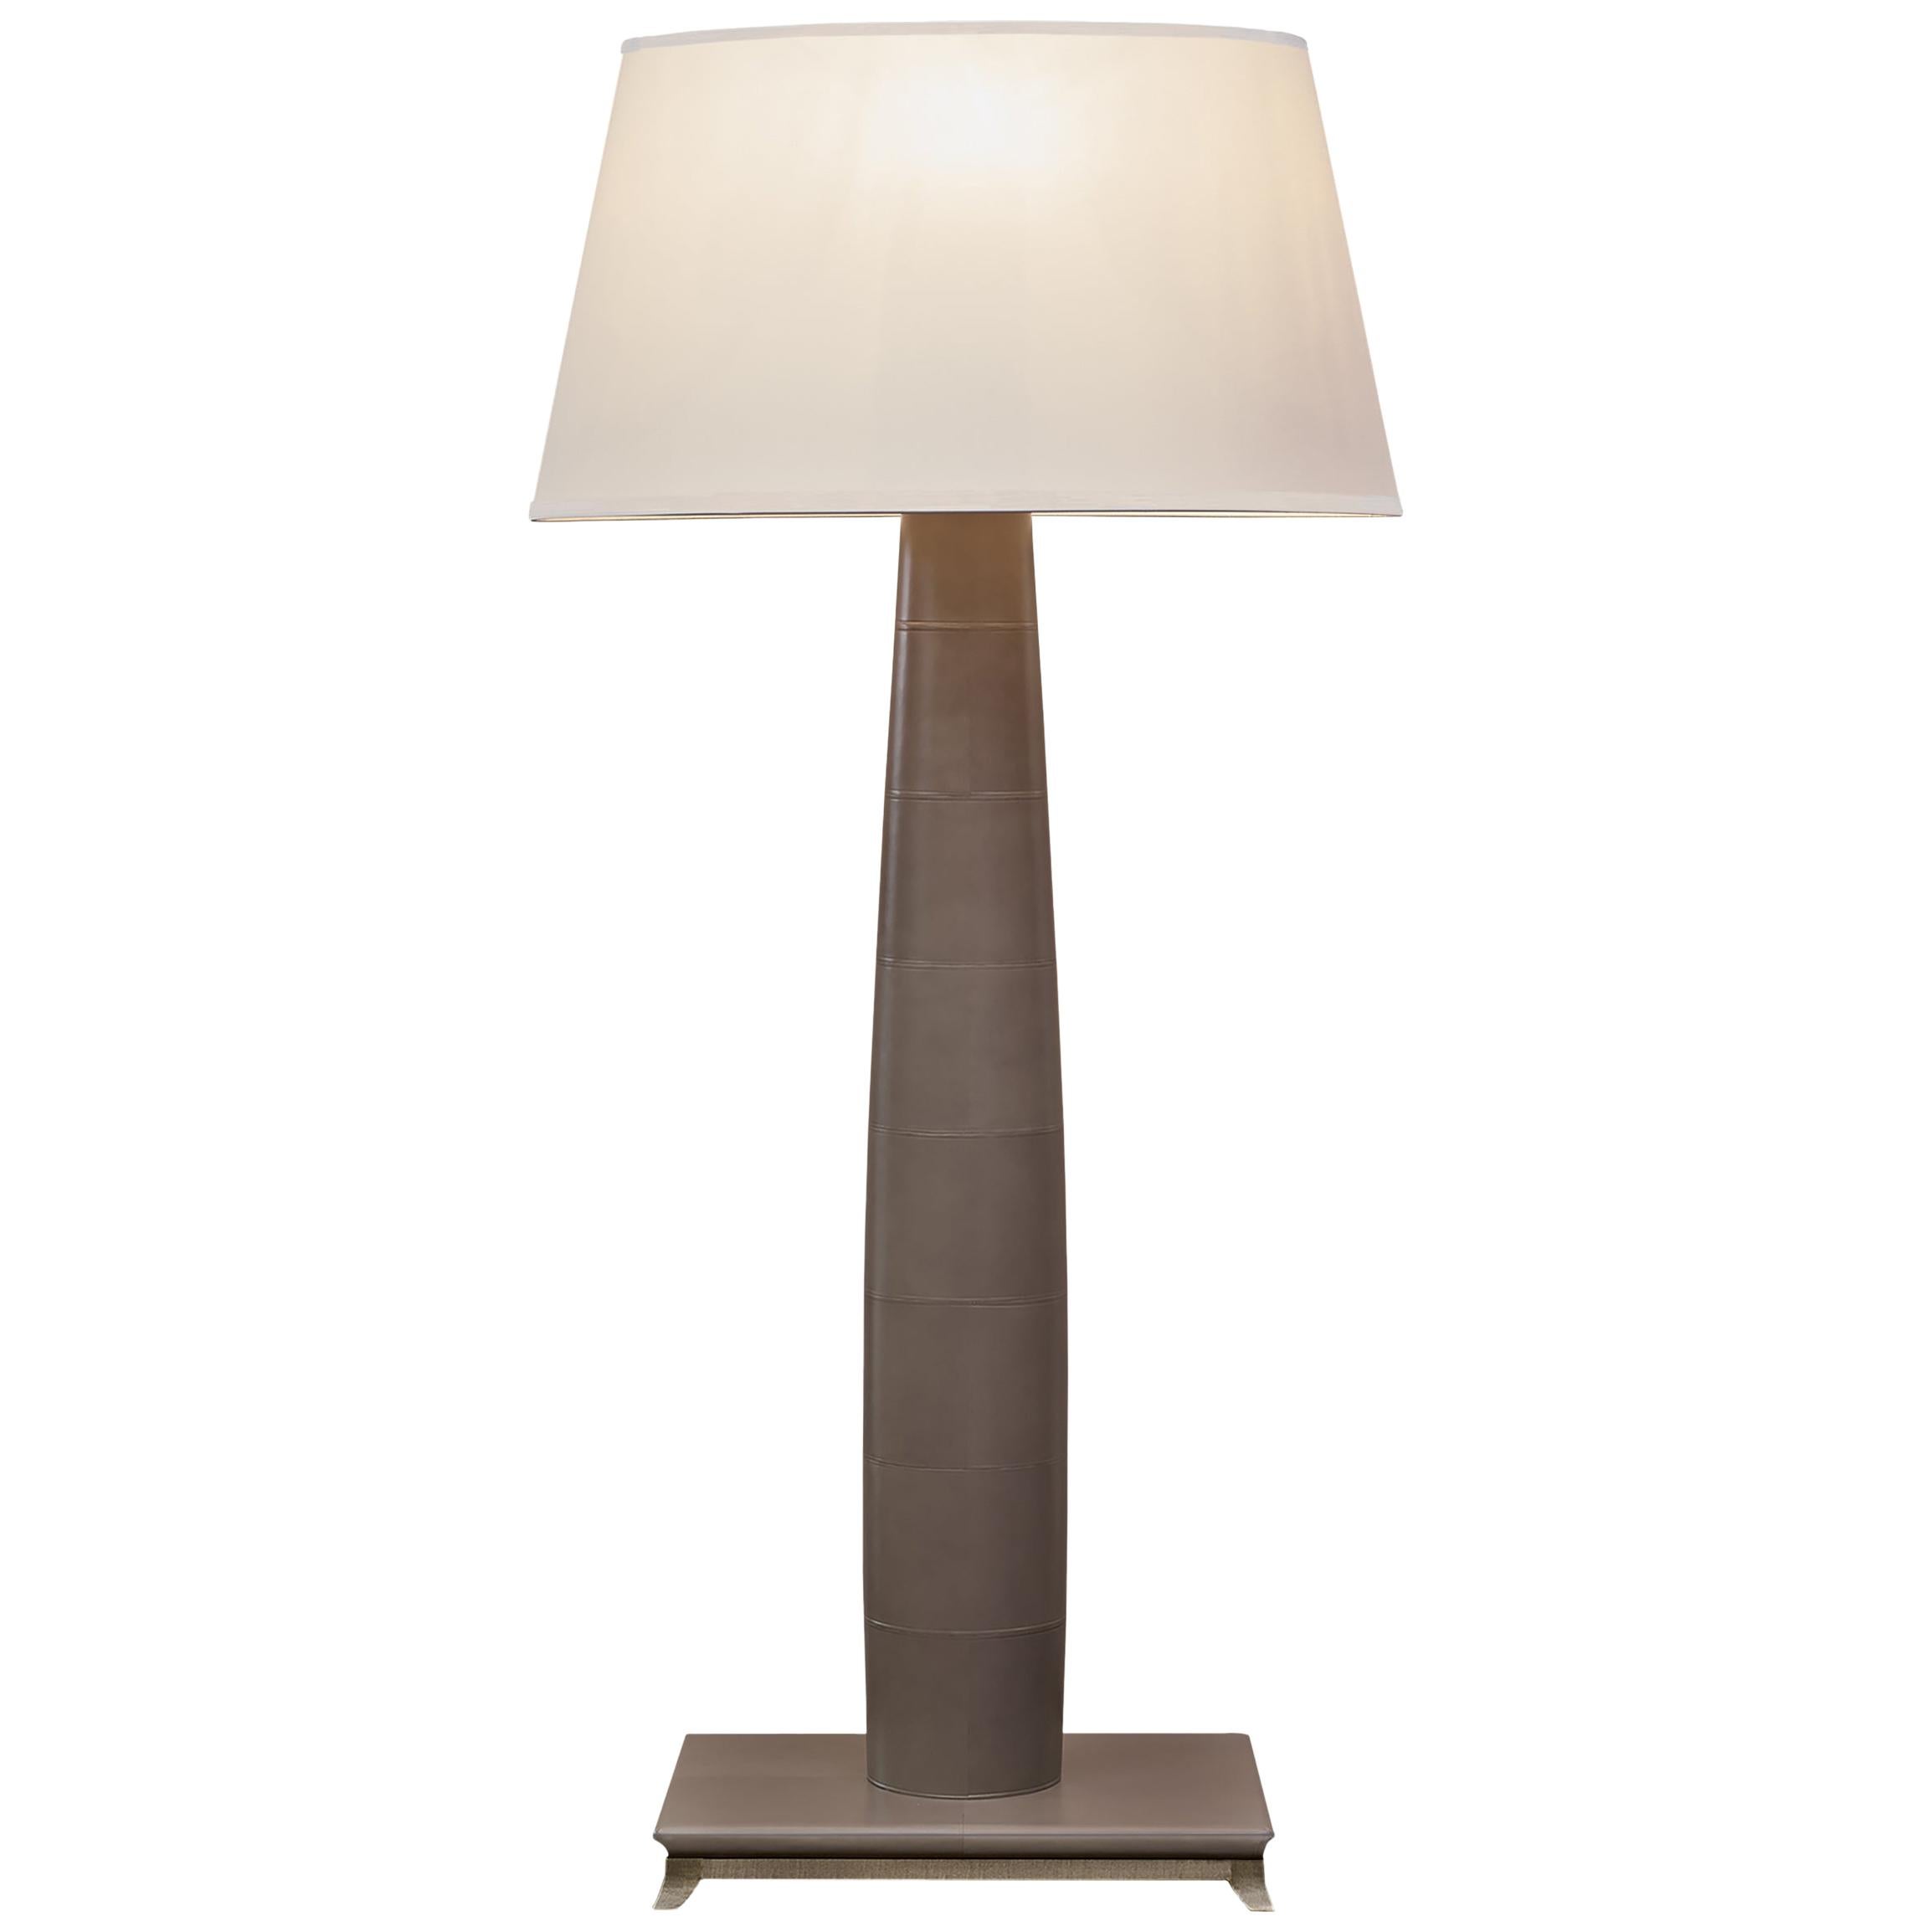 Promemoria Pia Floor Lamp in Leather and Bronze Base by Romeo Sozzi For Sale